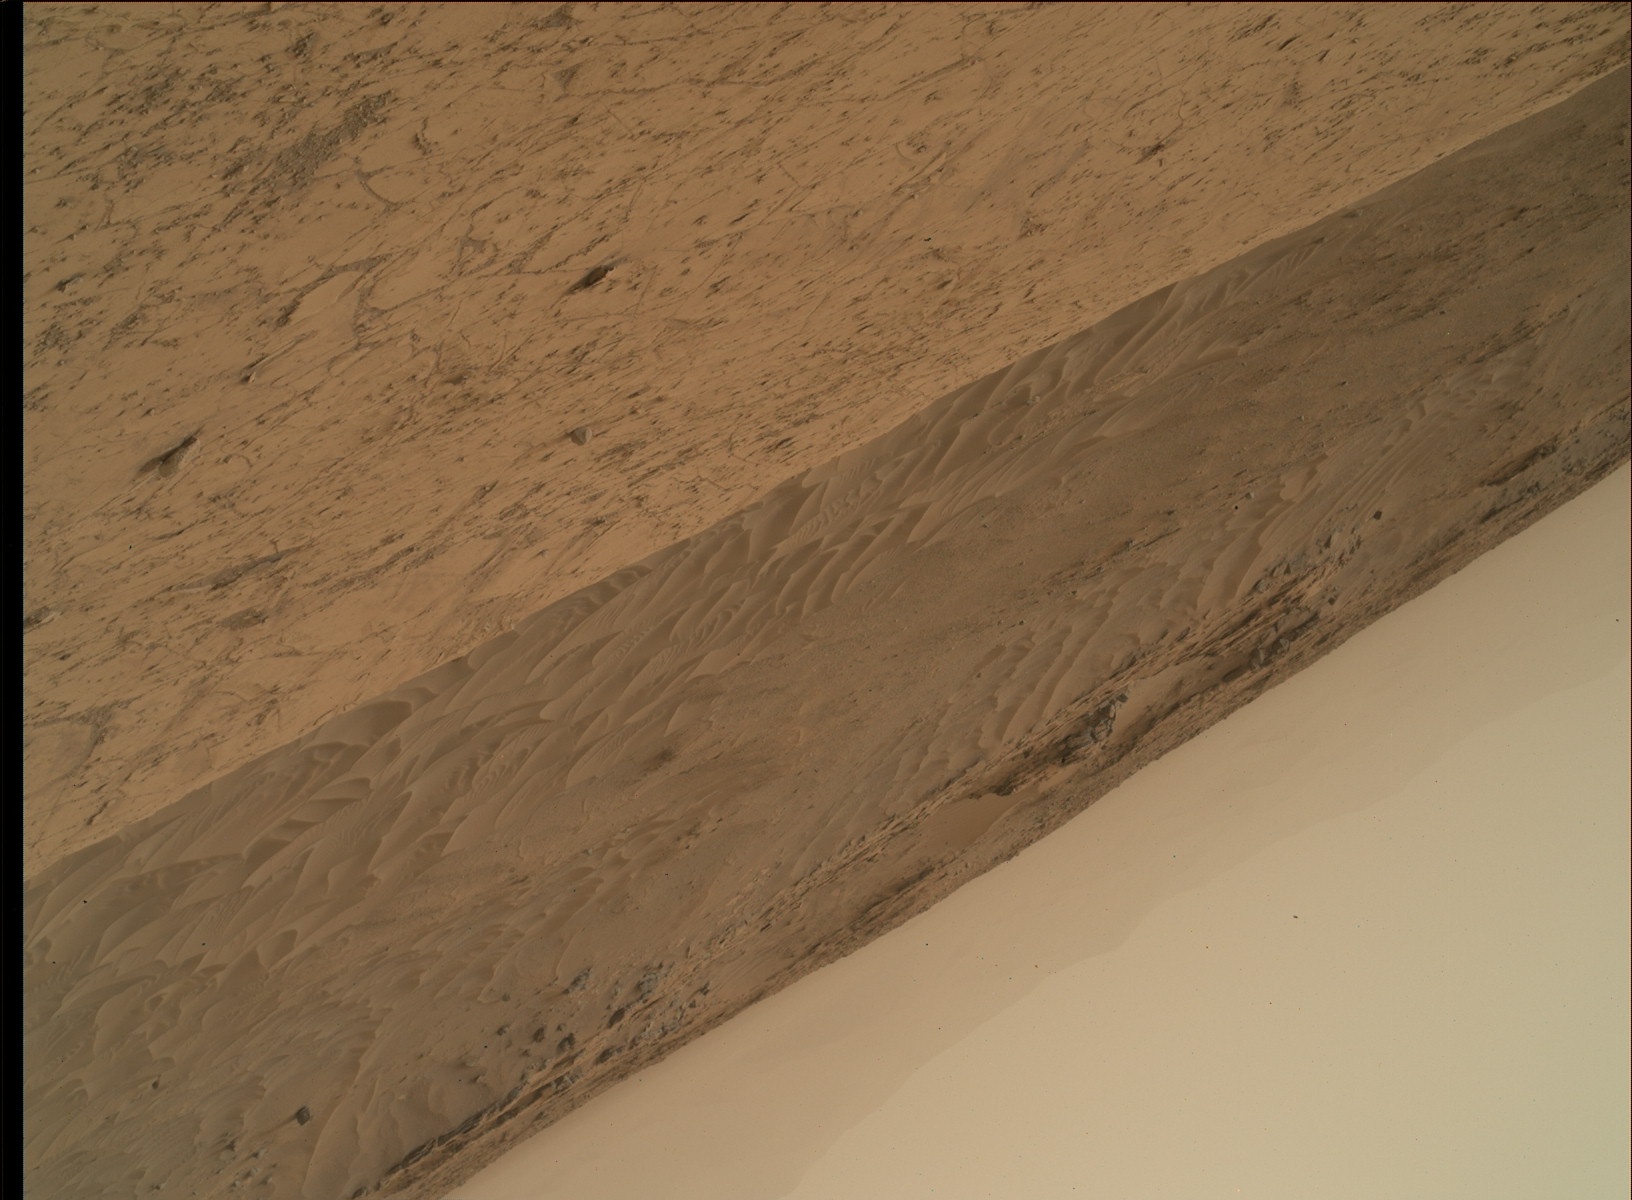 Nasa's Mars rover Curiosity acquired this image using its Mars Hand Lens Imager (MAHLI) on Sol 787